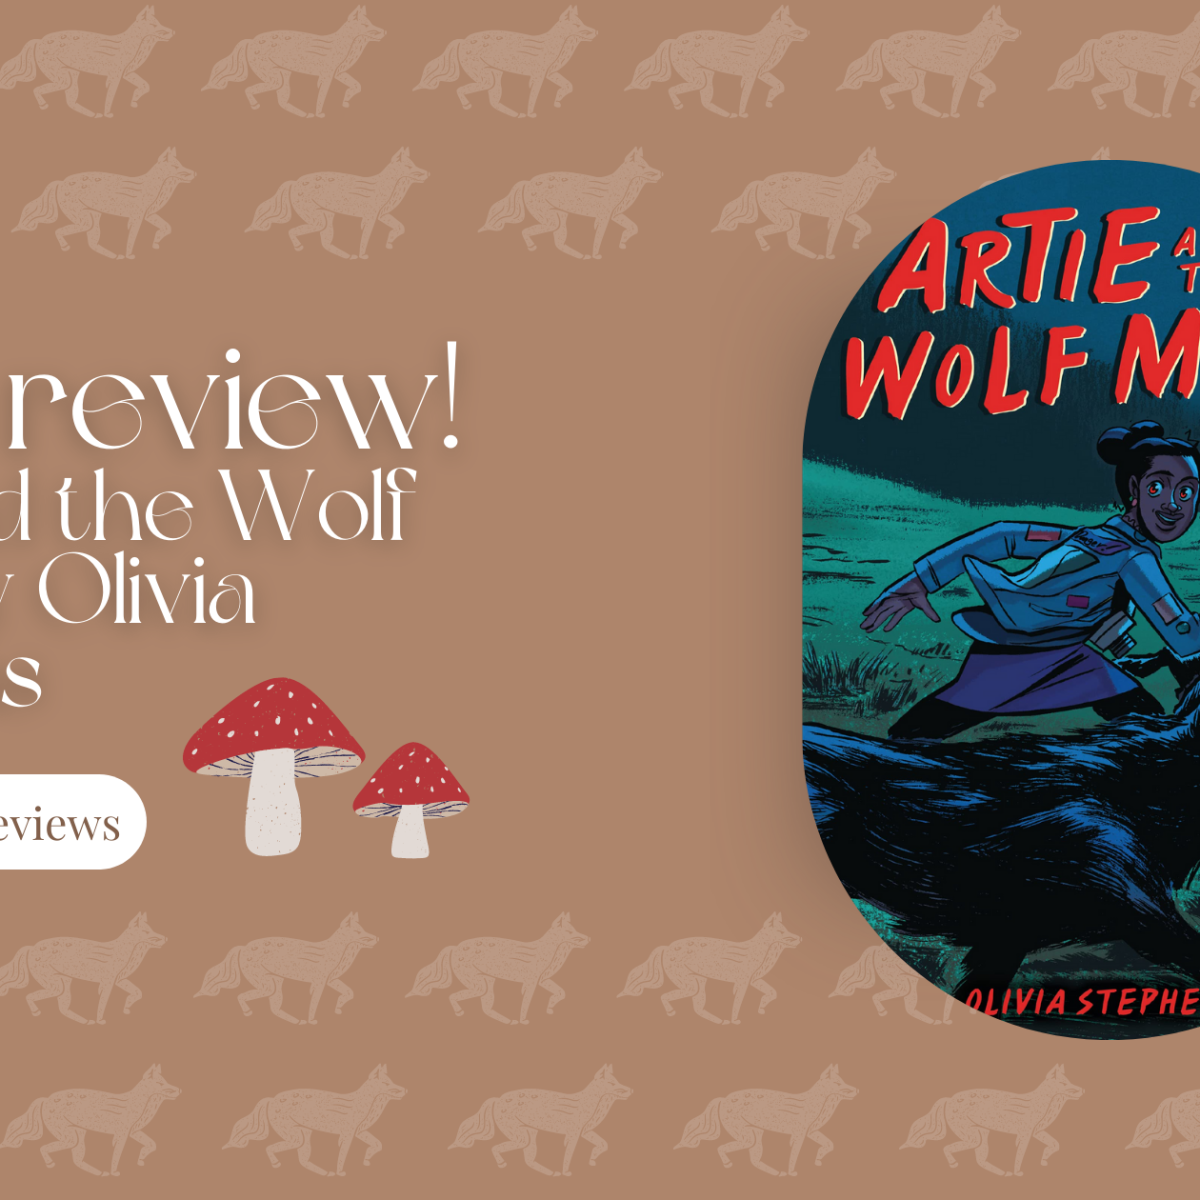 Book Review: Artie and the Wolf Moon by Olivia Stephens